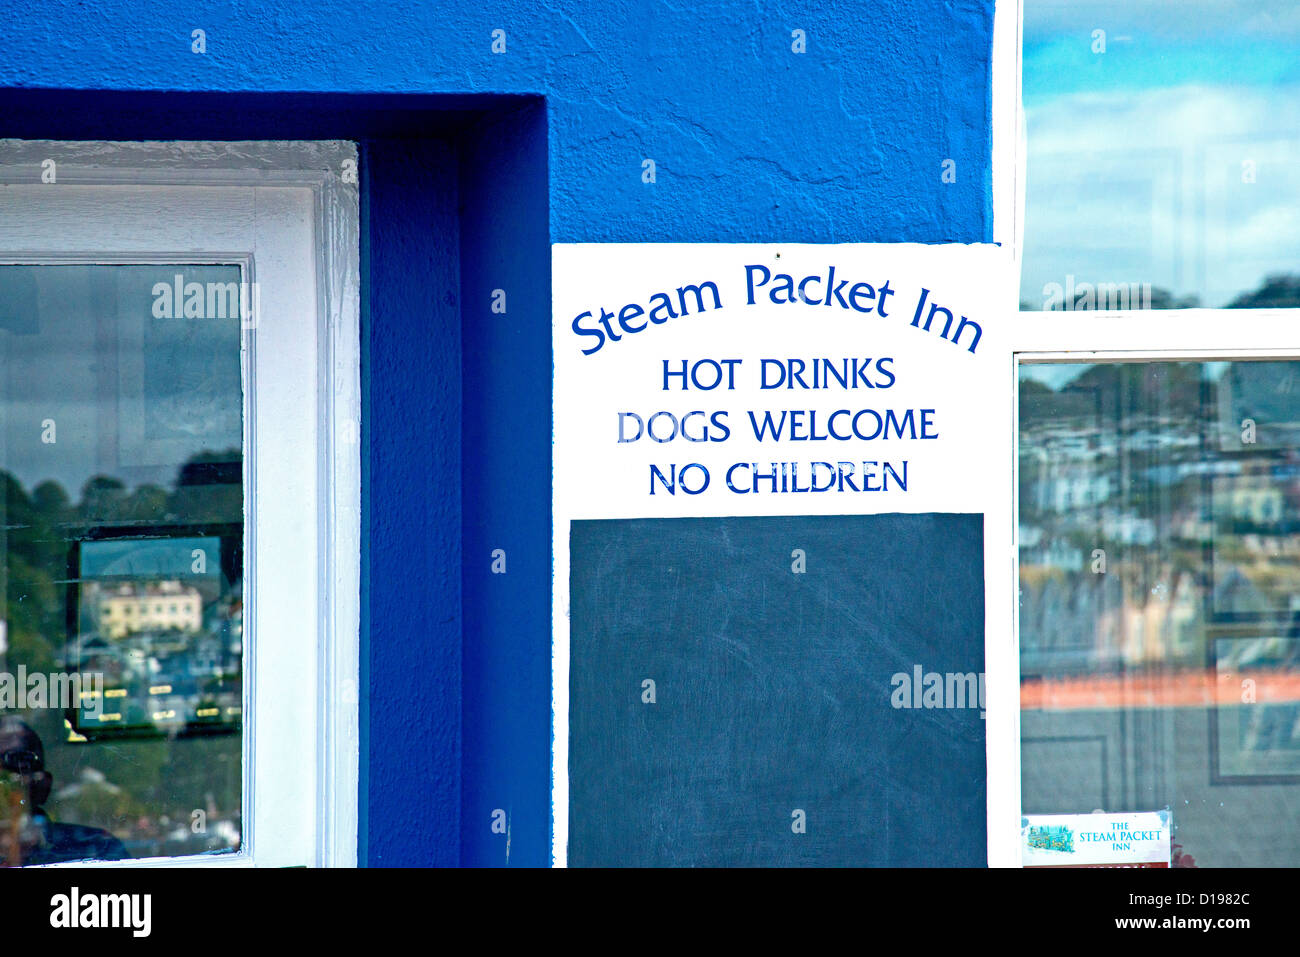 Advertisment outside an Inn 'no children, dogs welcome' Stock Photo